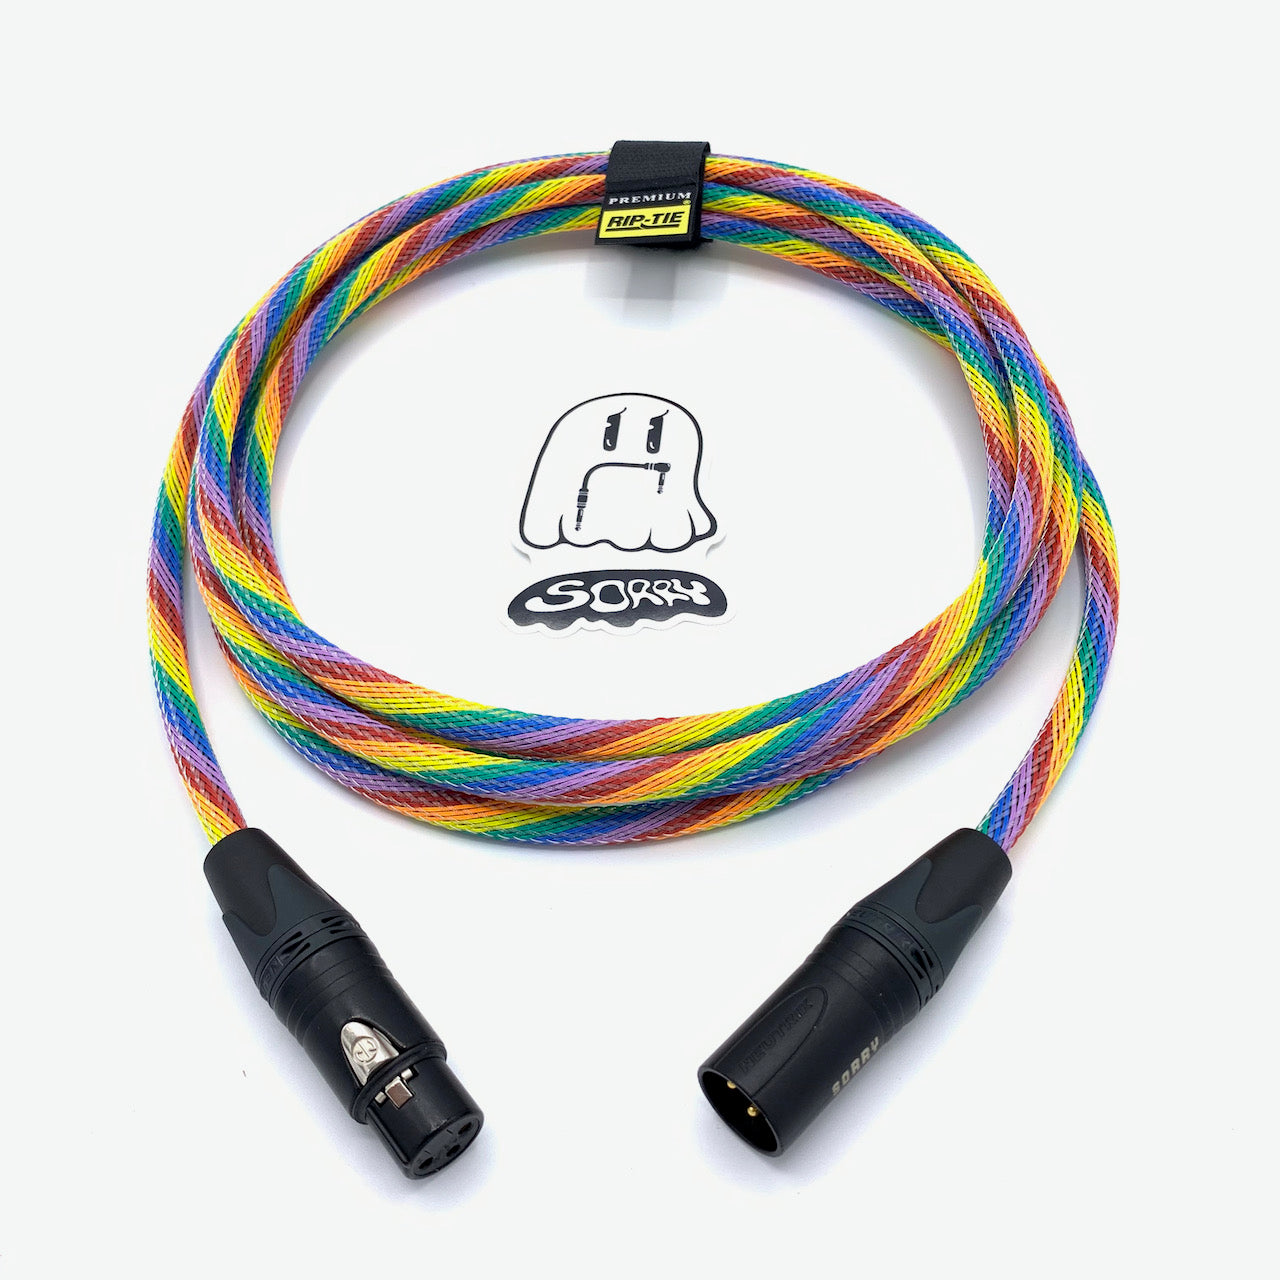 SORRY Microphone Cable - Rainbow